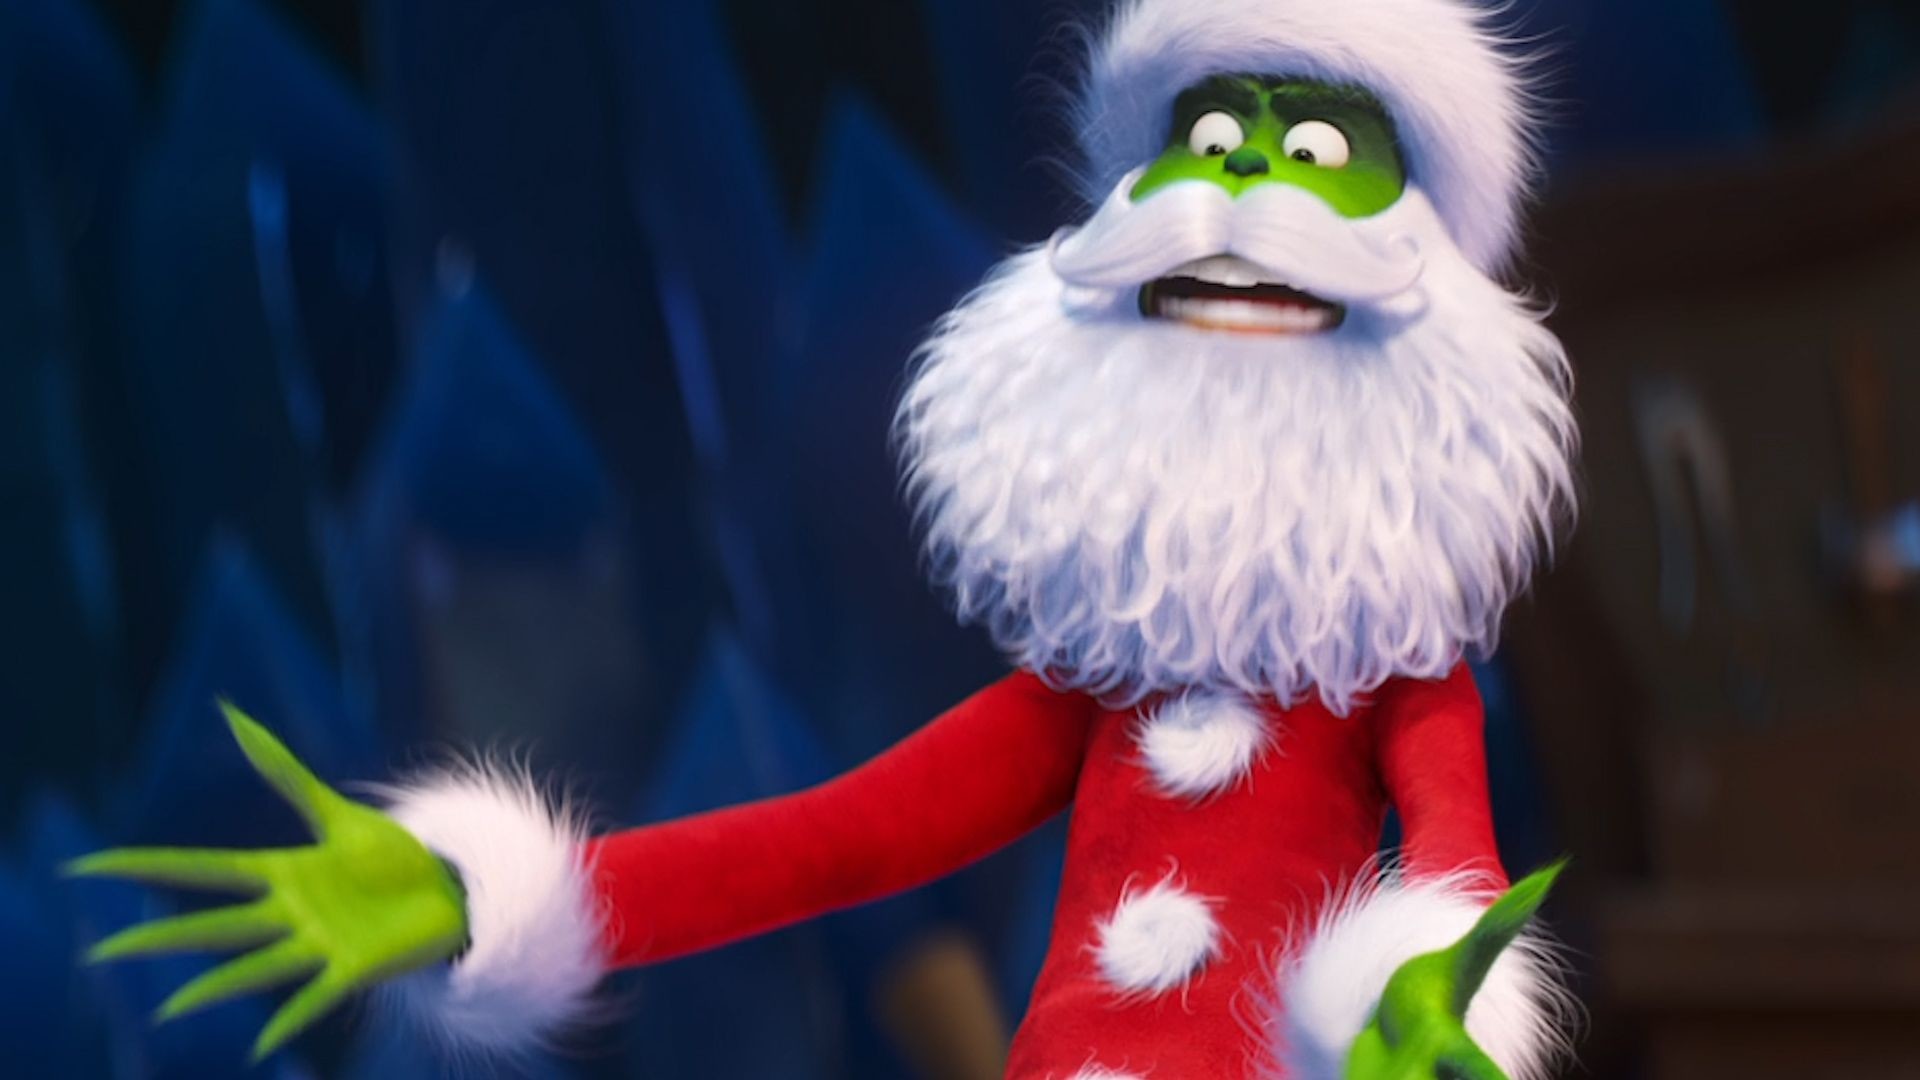 1920x1080 1976x3000 grinch wallpaper - Pesquisa Google | Home for the Holidays ...">